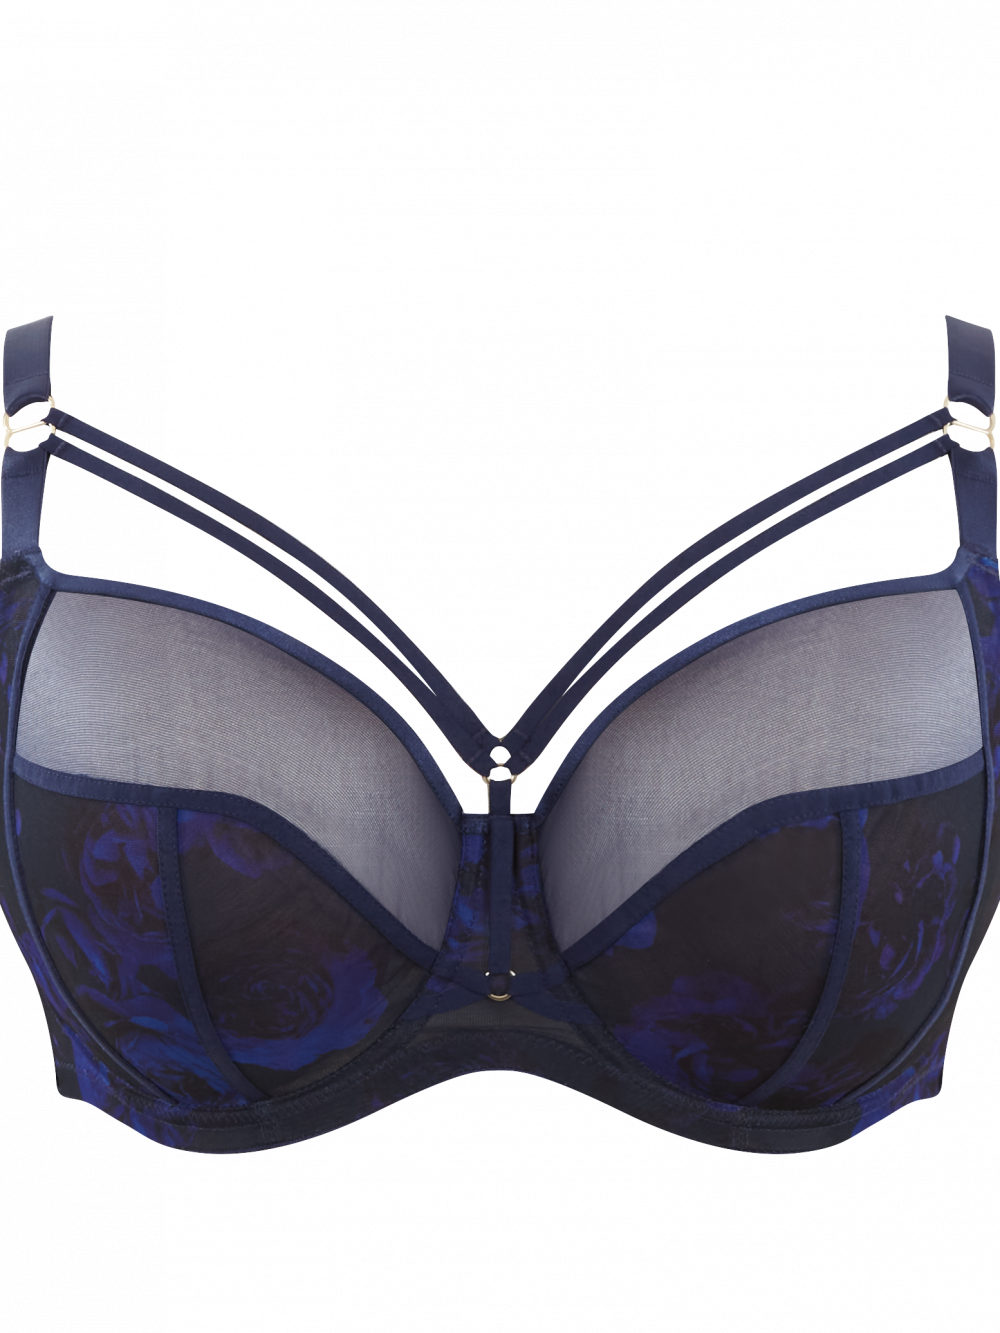 Buy Triumph Flower Passione Style Wired Padded Delicate Lace Big Cup Bra -  Bra for Women 7340707